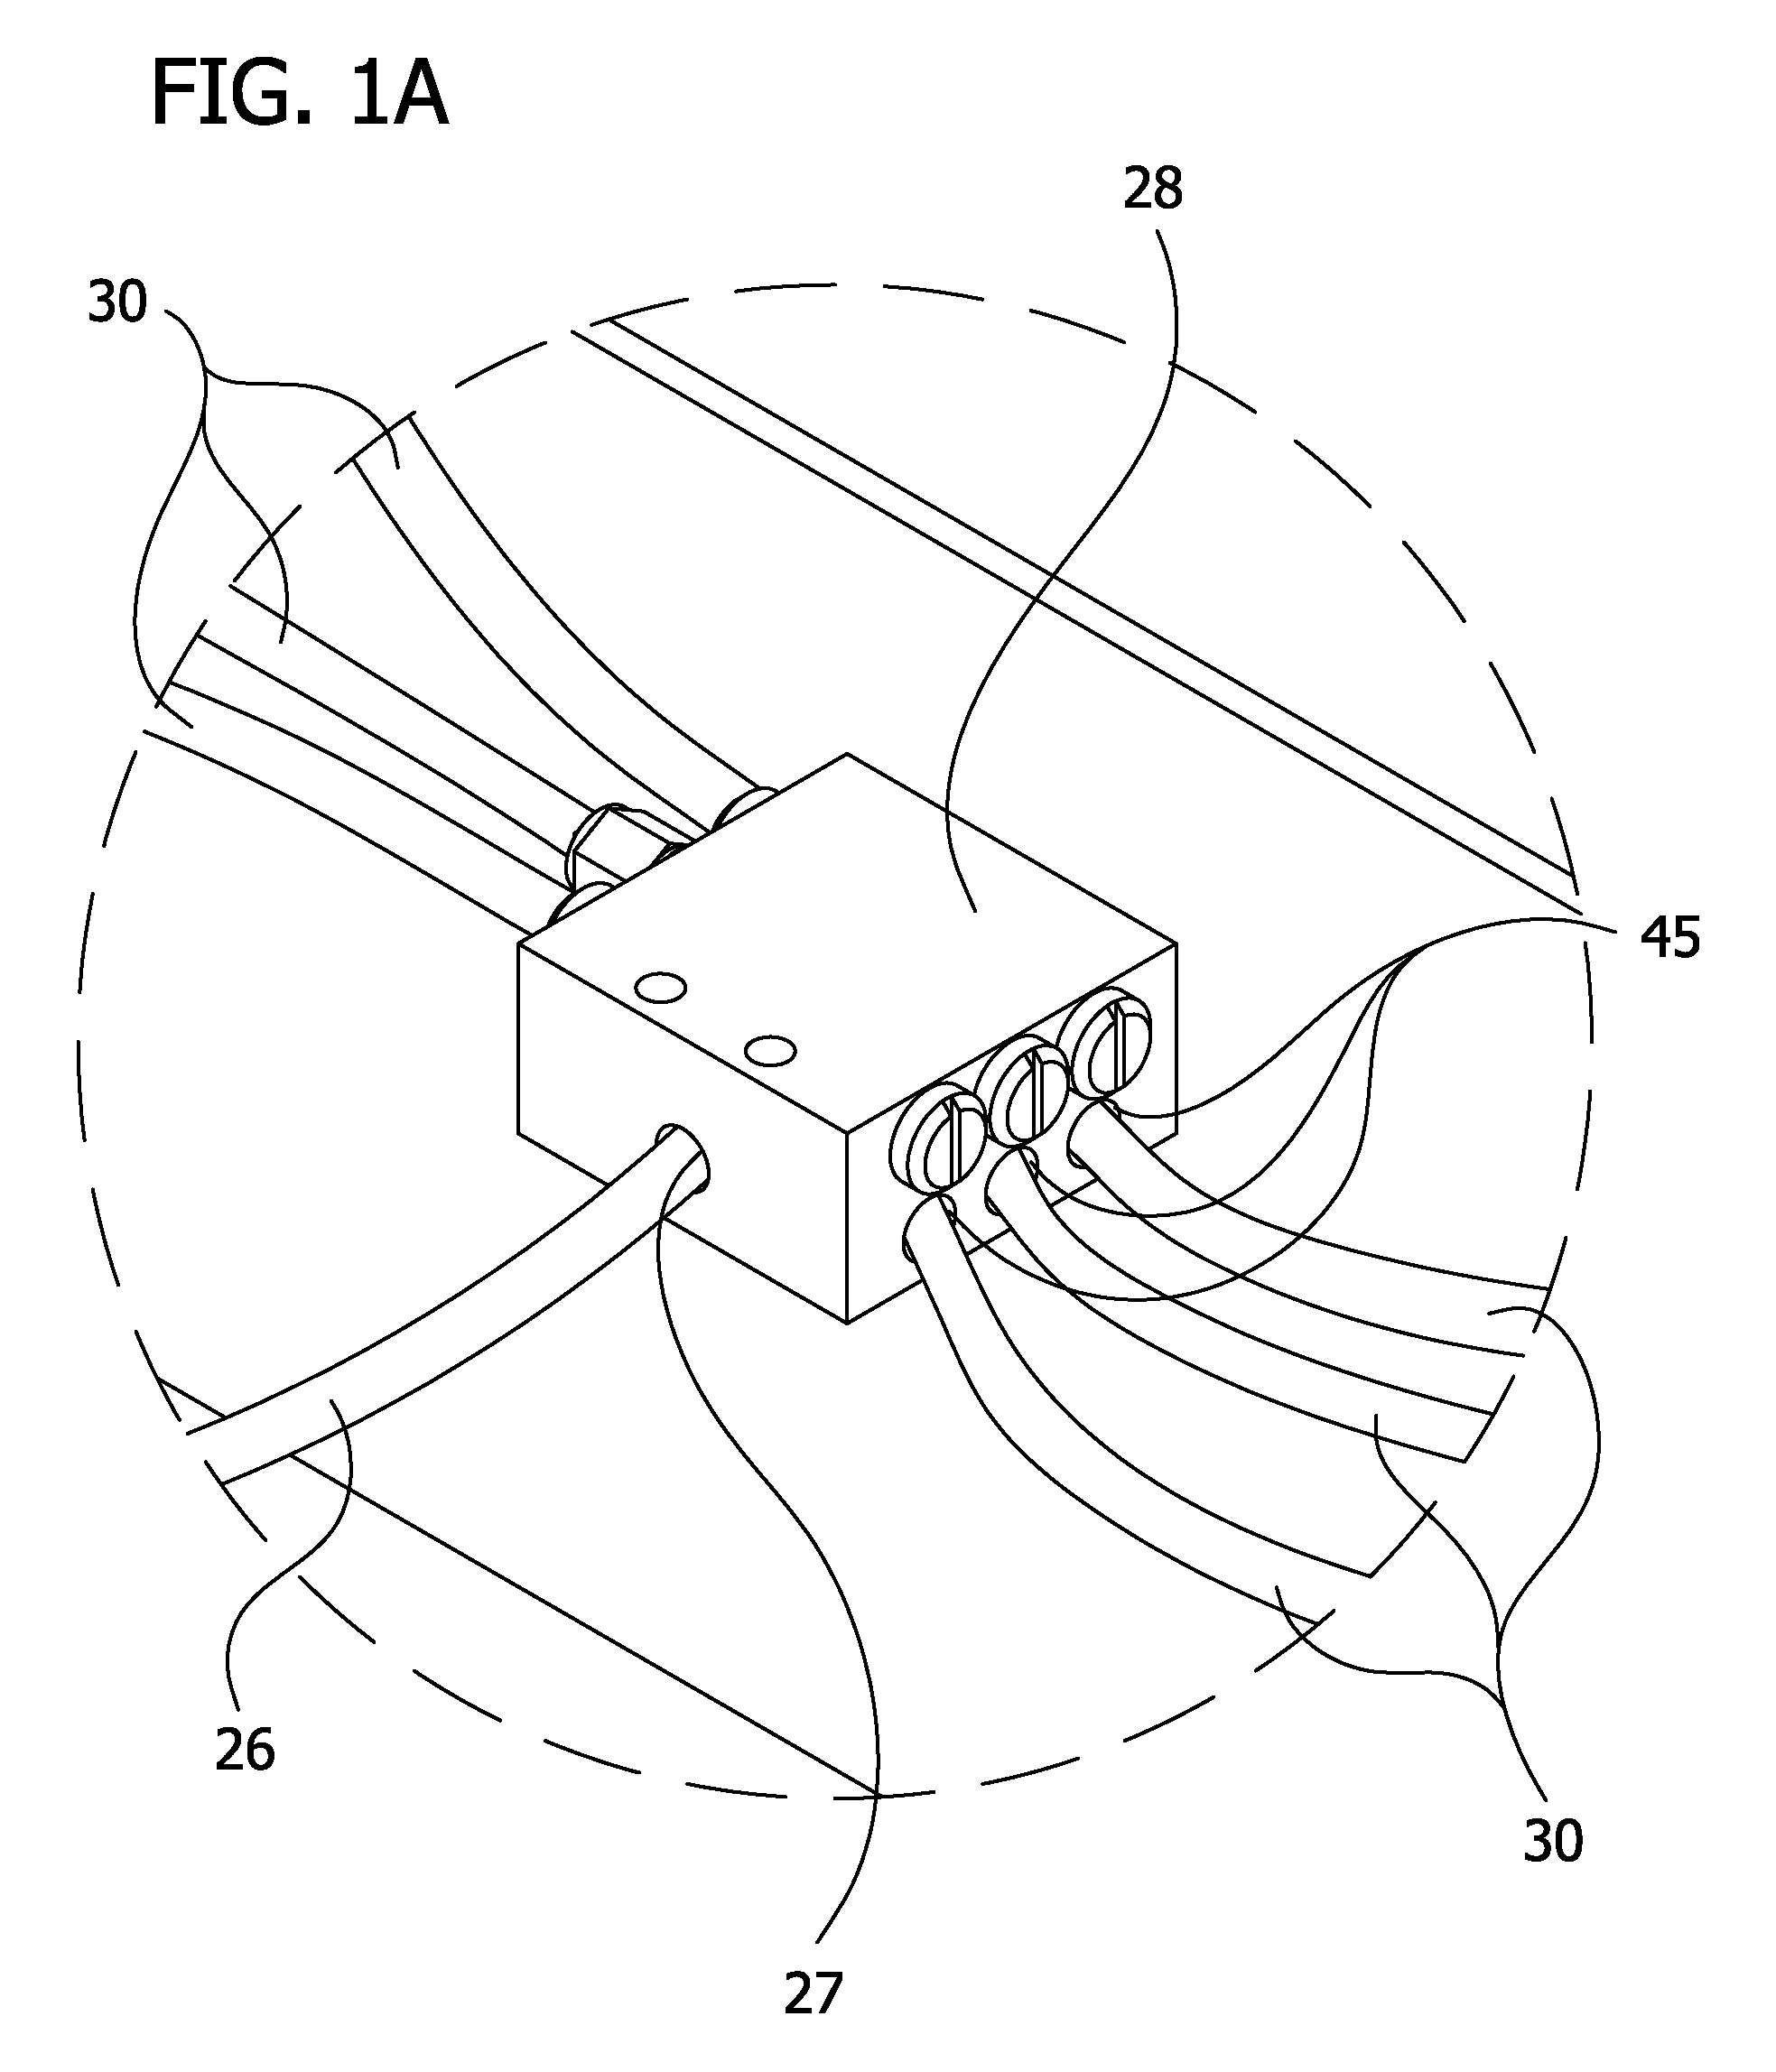 Apparatus for applying a pumpable material to a rail head